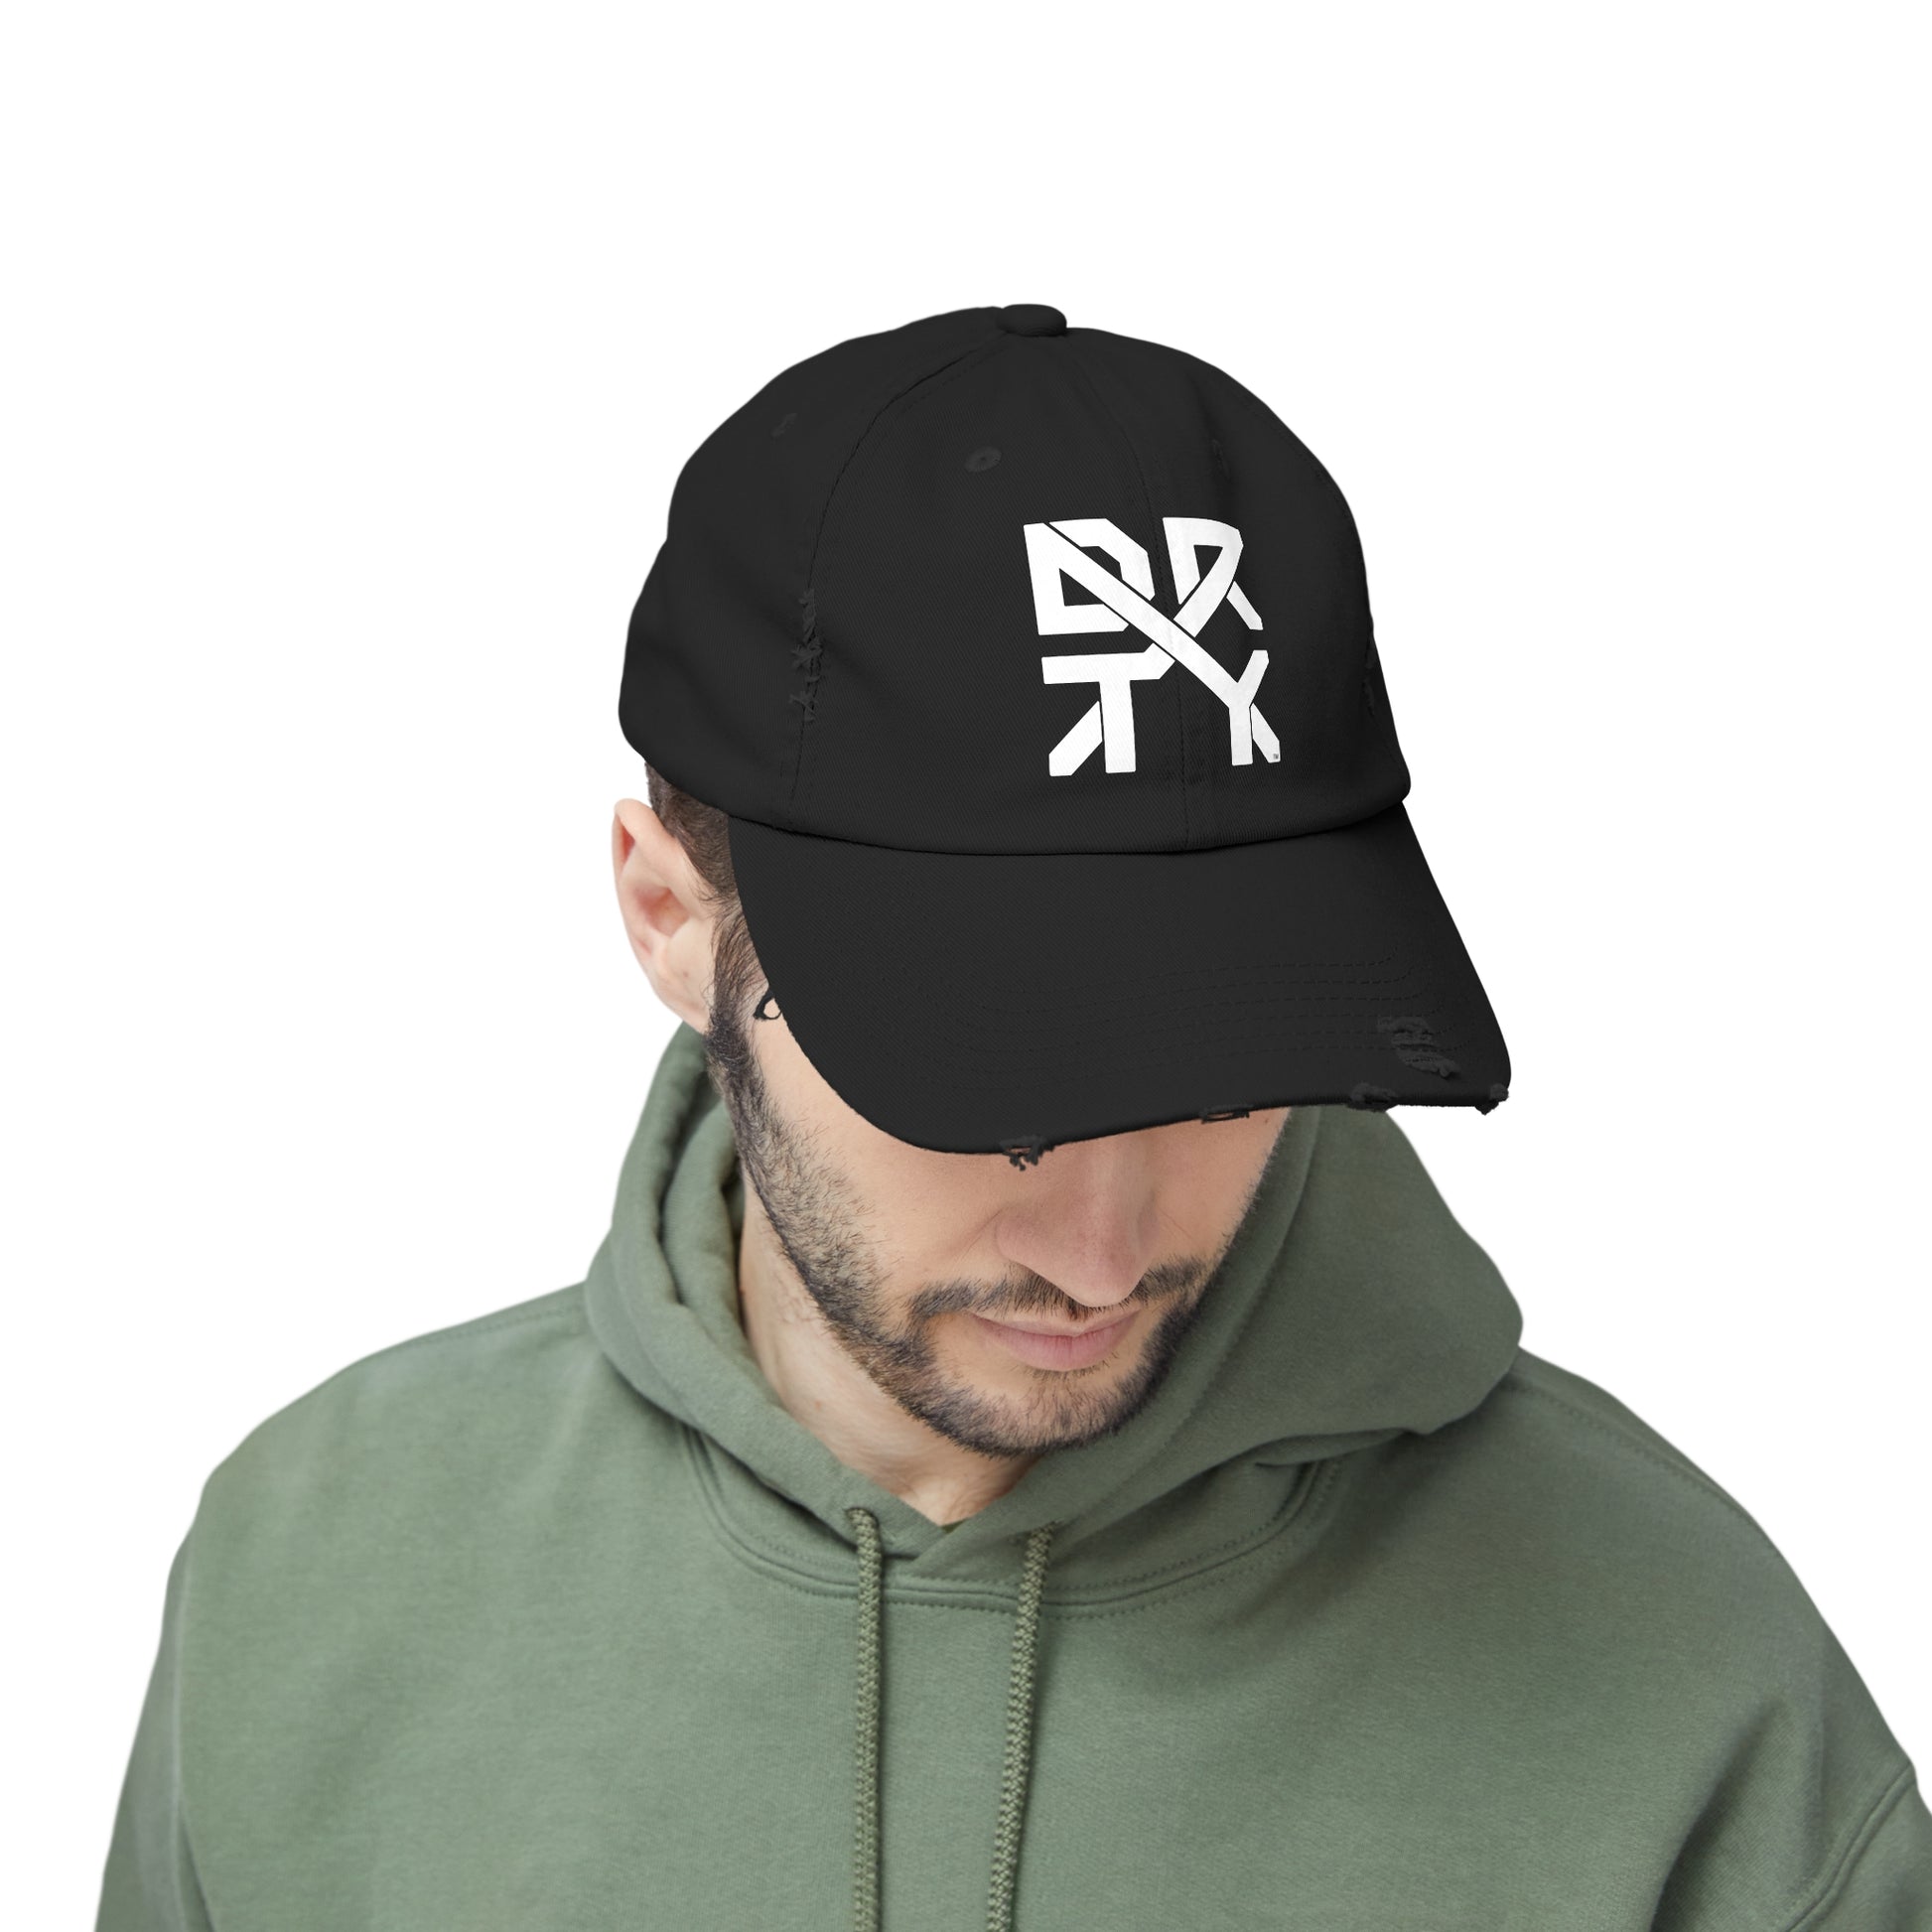 This image showcases the front view of a hat on a man  with the DRTYX logo in the center of the hat.